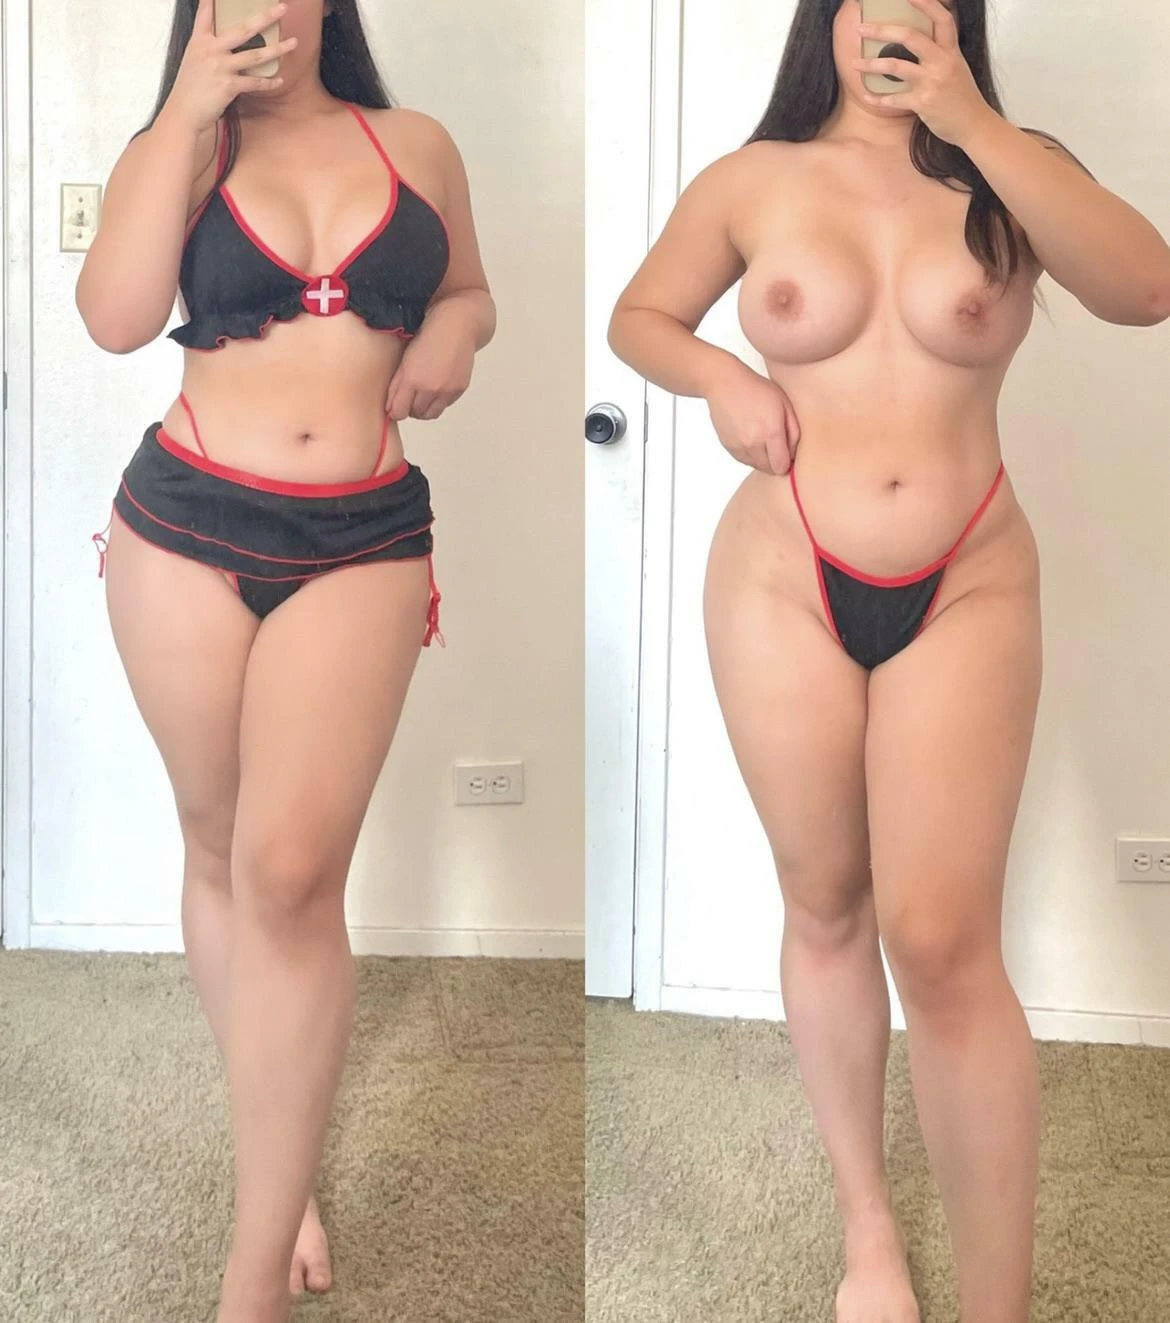 Tbh, from scale 1-10, how would you rate a curvy Korean girl?